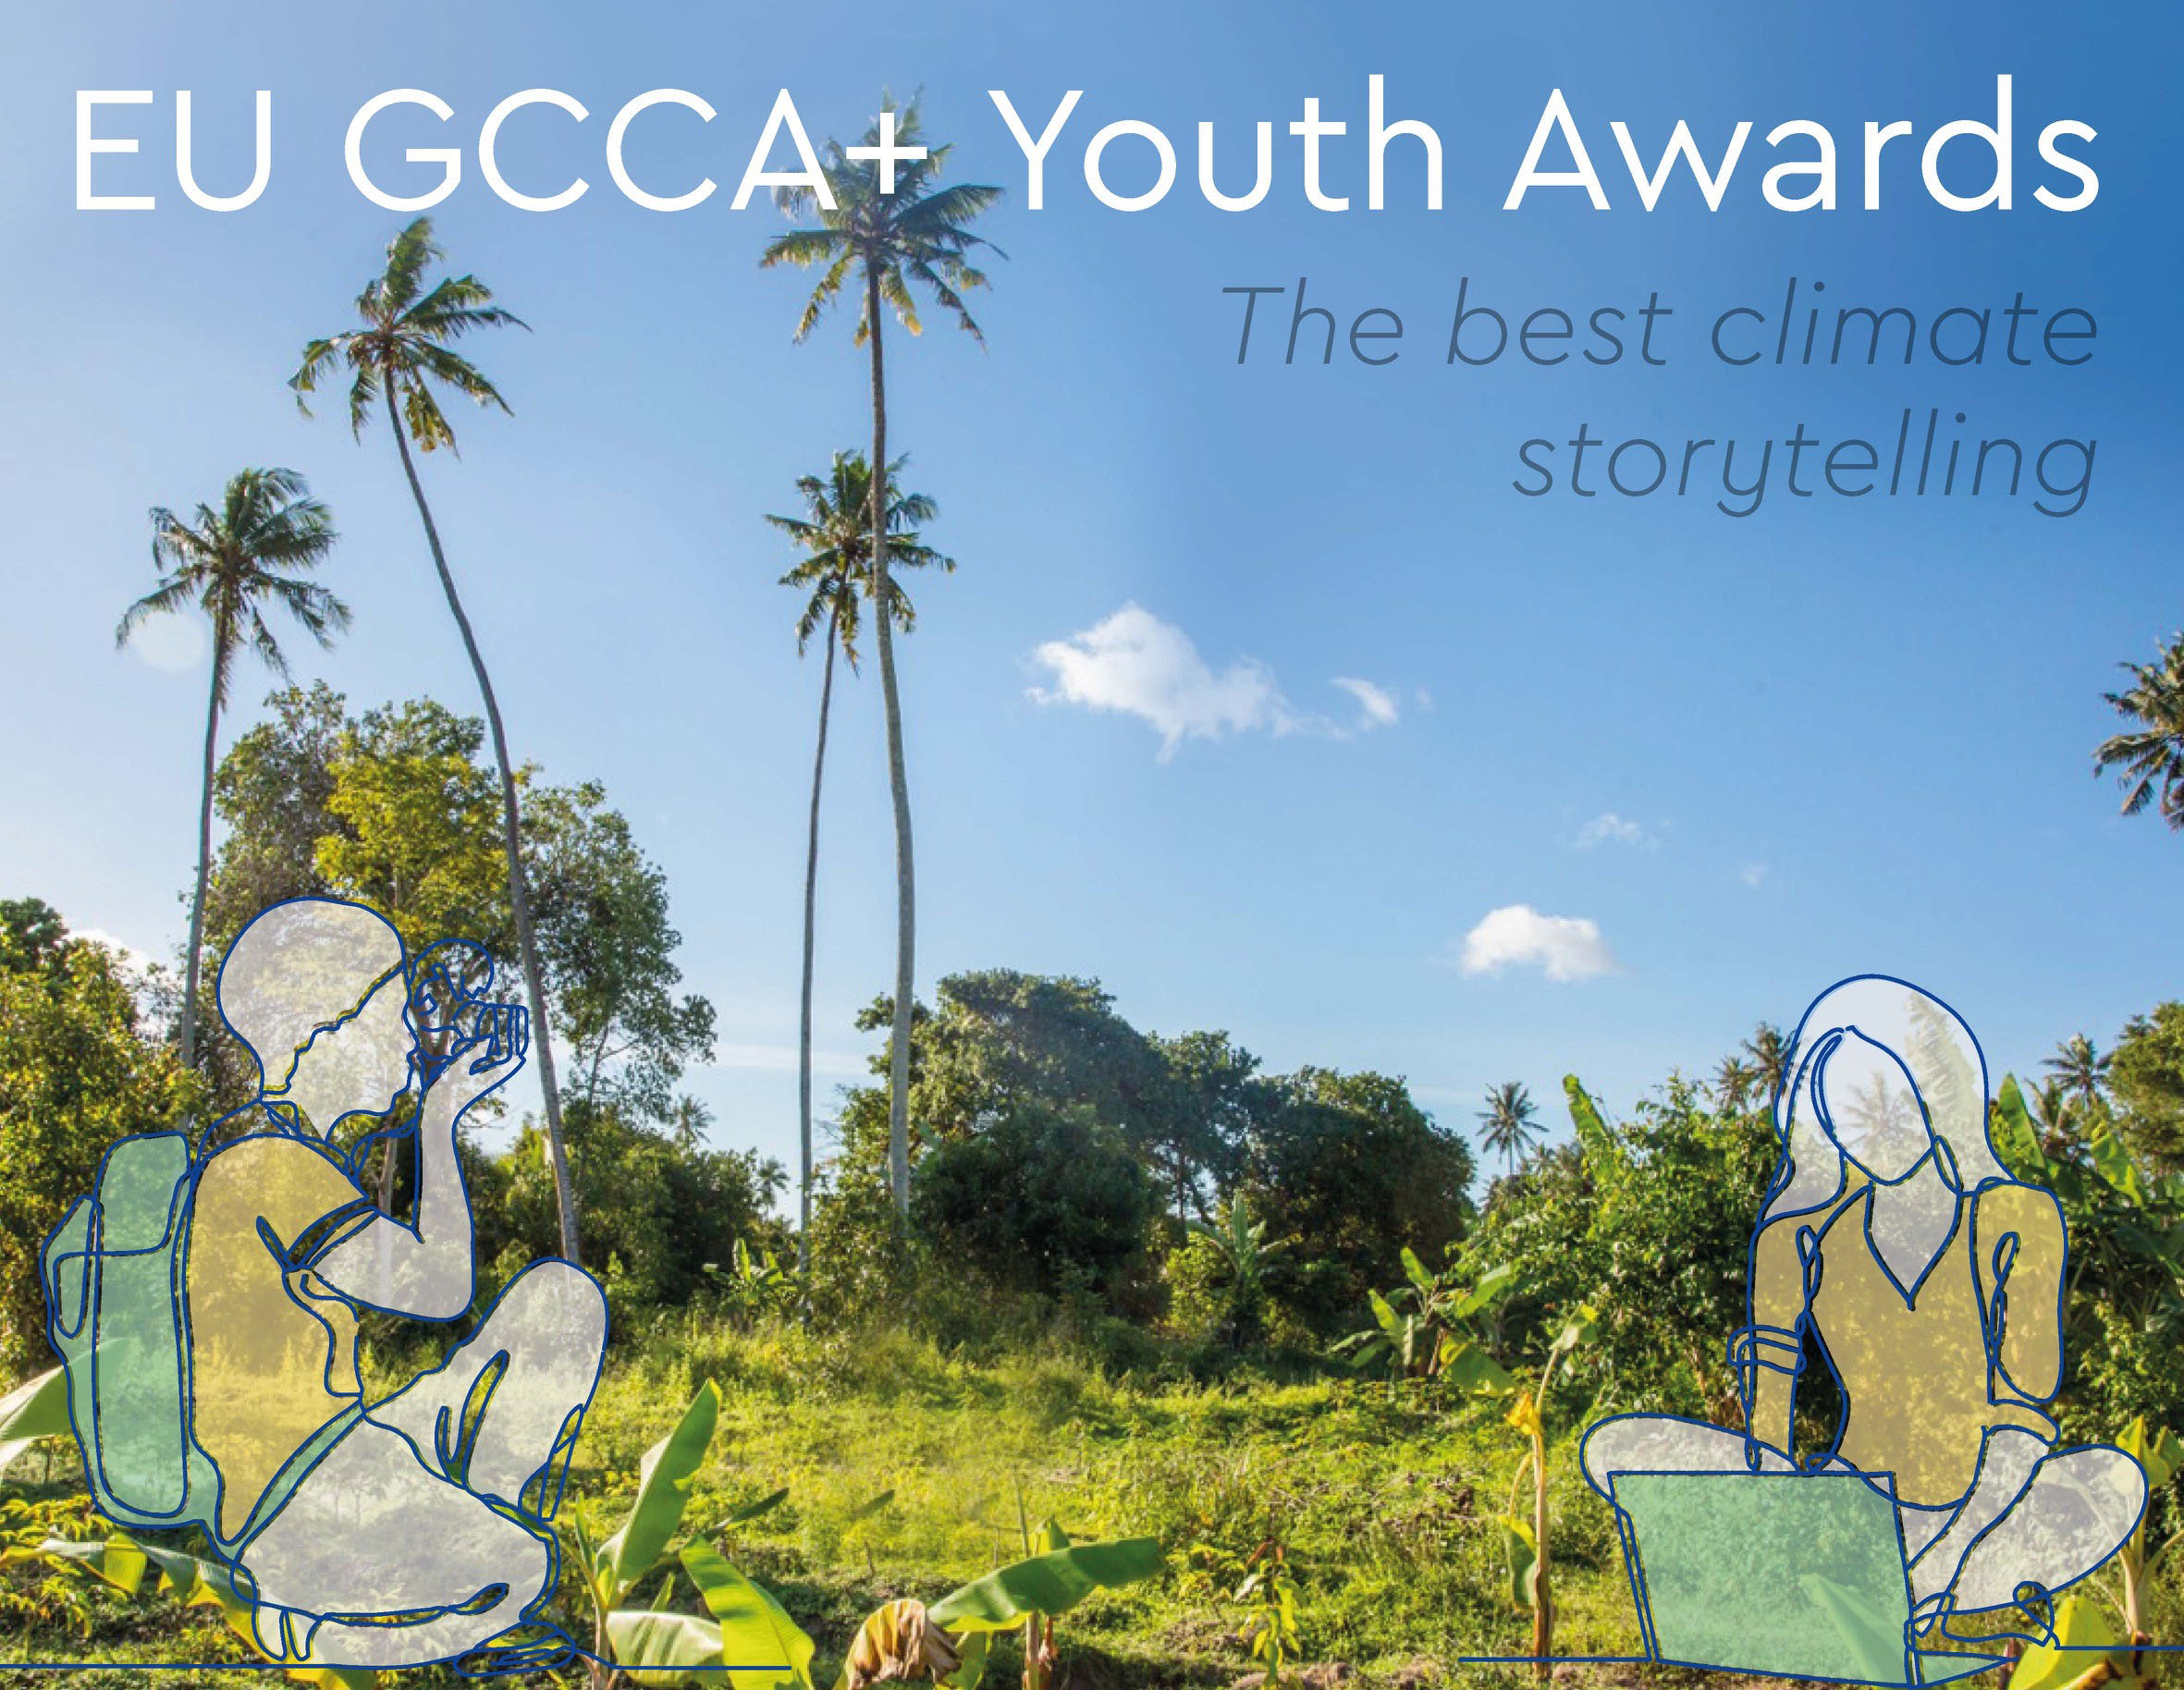 European Union Global Climate Change Alliance Plus (EU GCCA+) Youth Awards 2021 for the Best Climate Storytelling